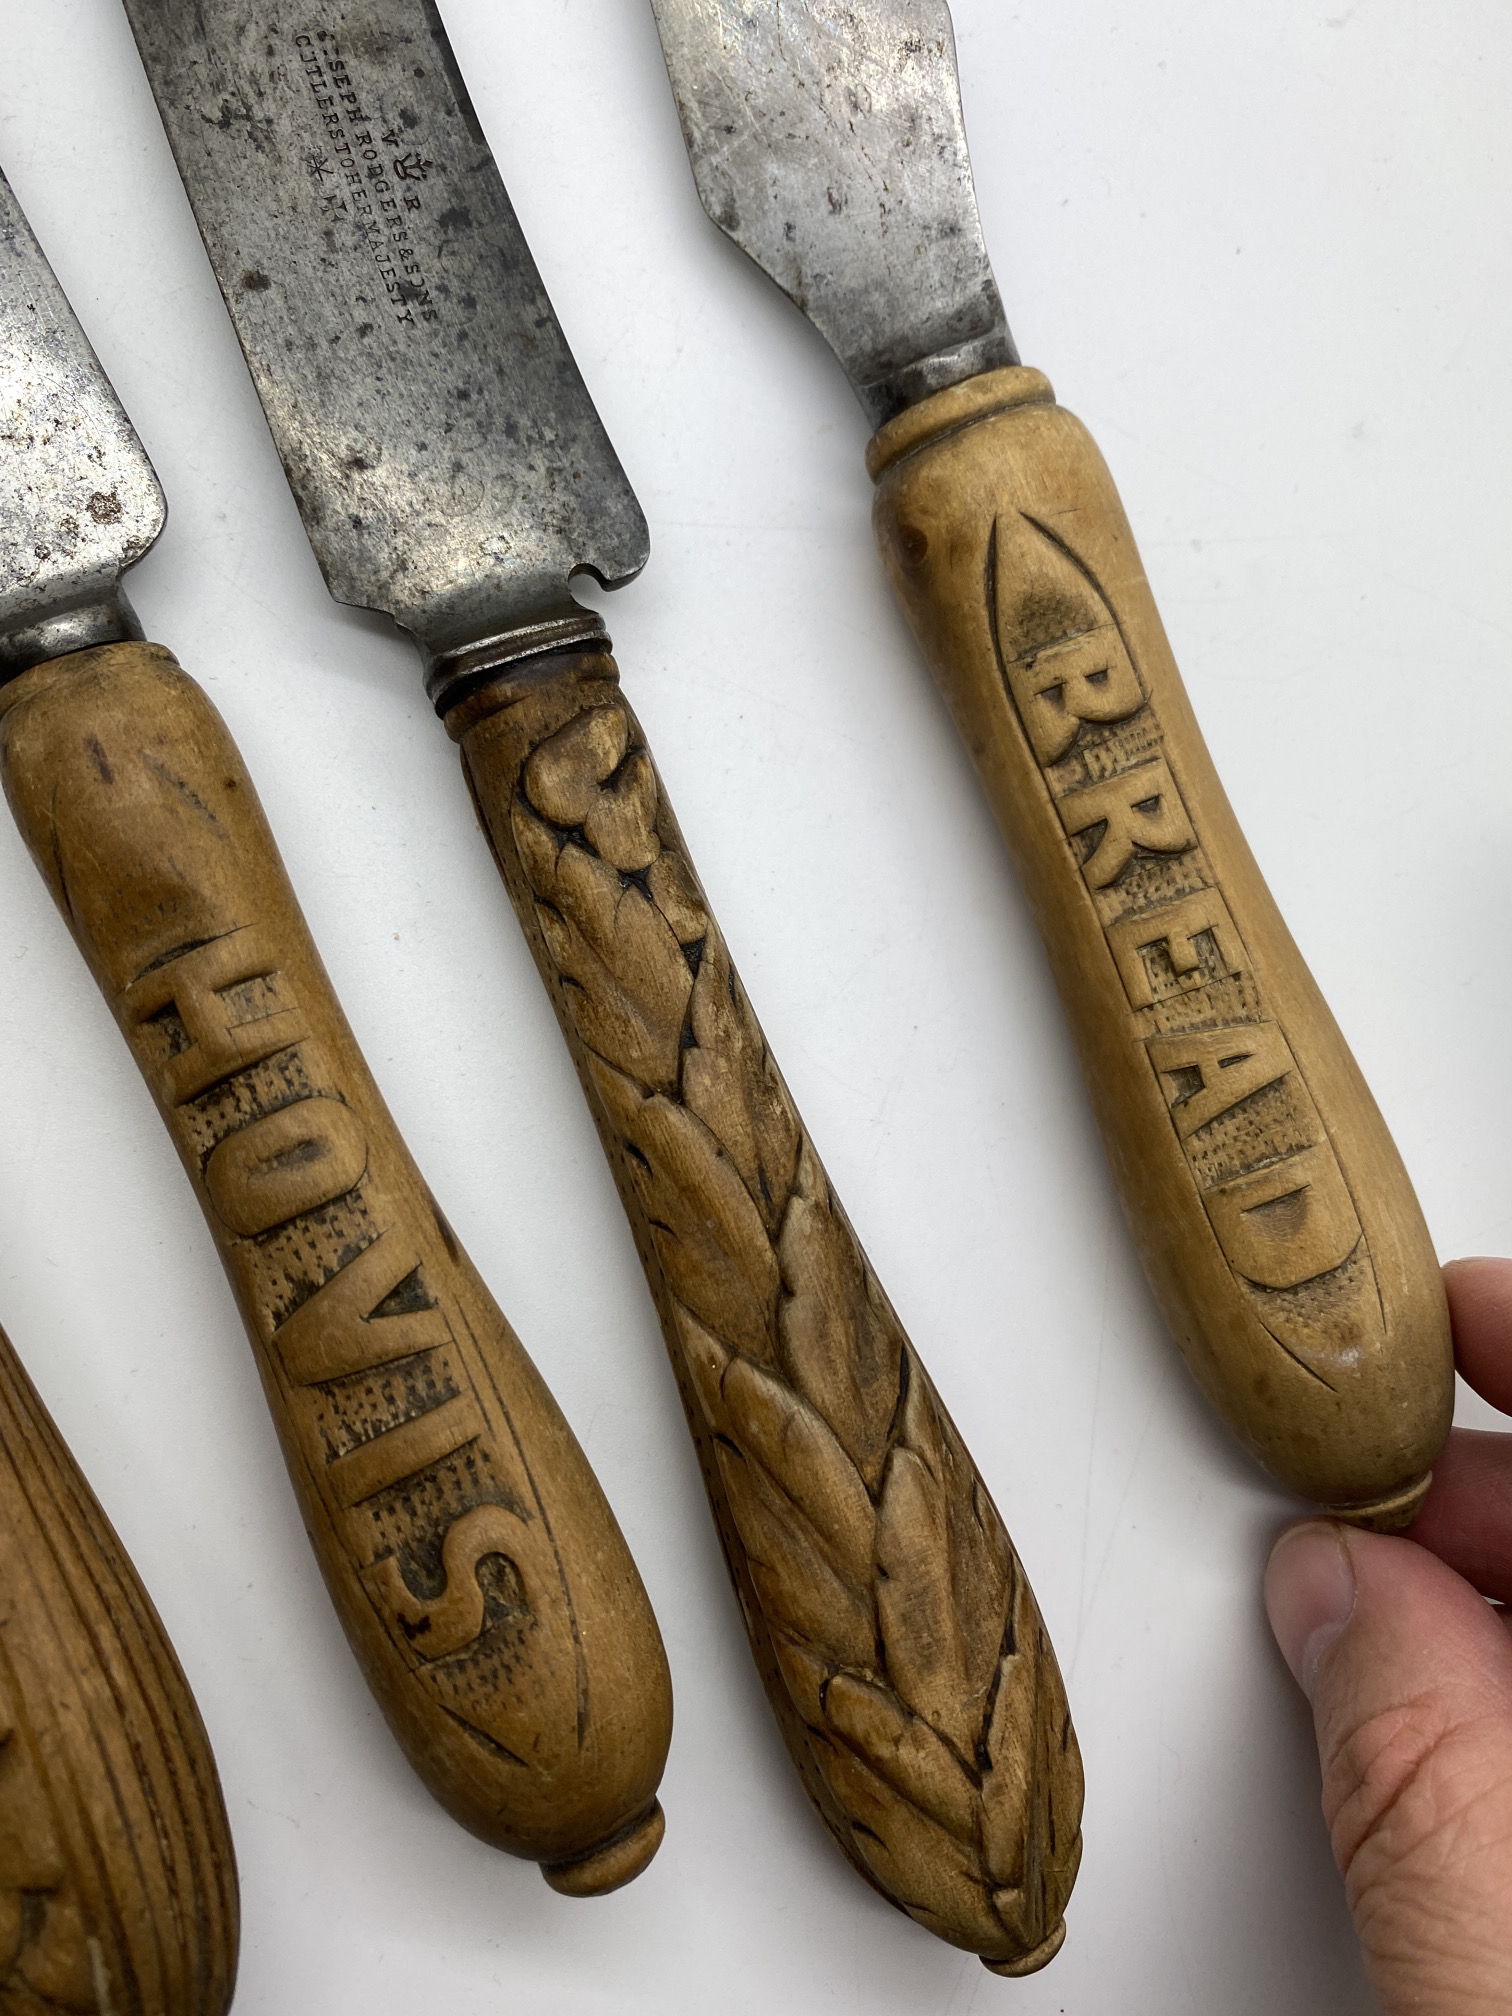 5 x ANTIQUE 1930's BREAD KNIVES INCLUDING HOVIS & BREAD - INC JOSEPH RODGERS - WHEAT SHEAF ETC - Image 3 of 14